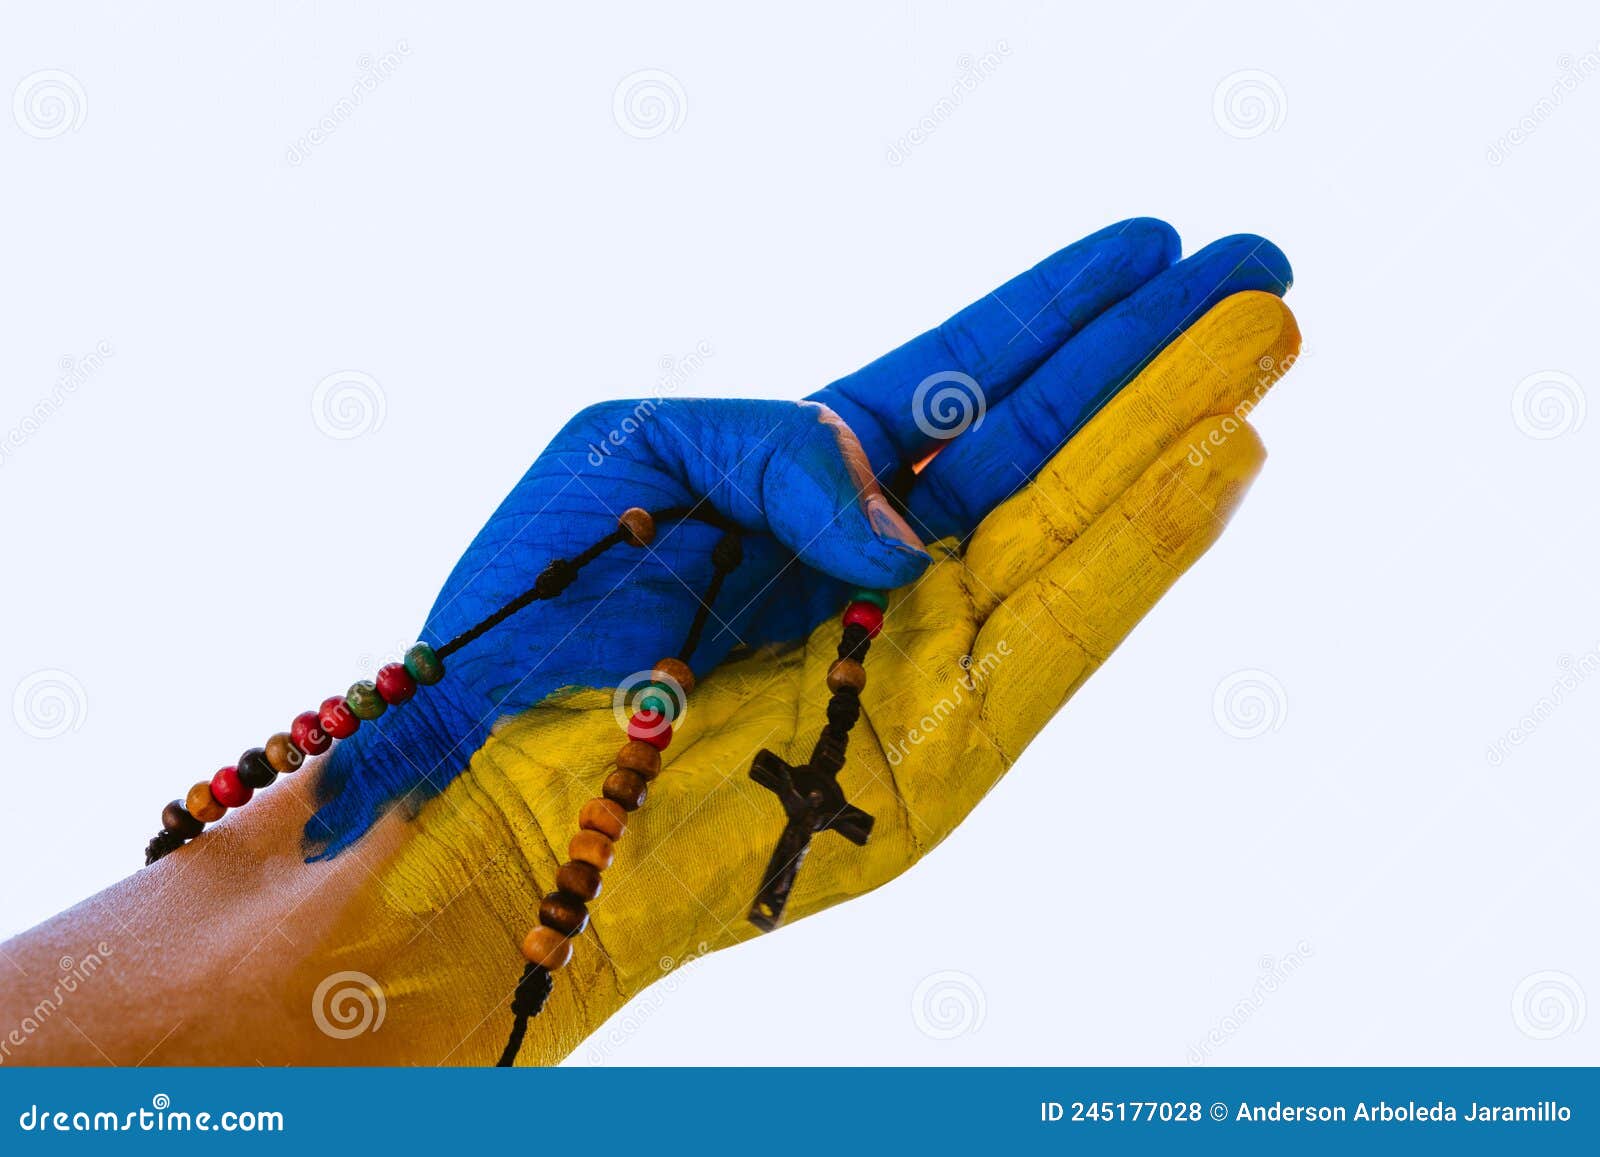 person's hand painted with ukraine flag with jesus necklace